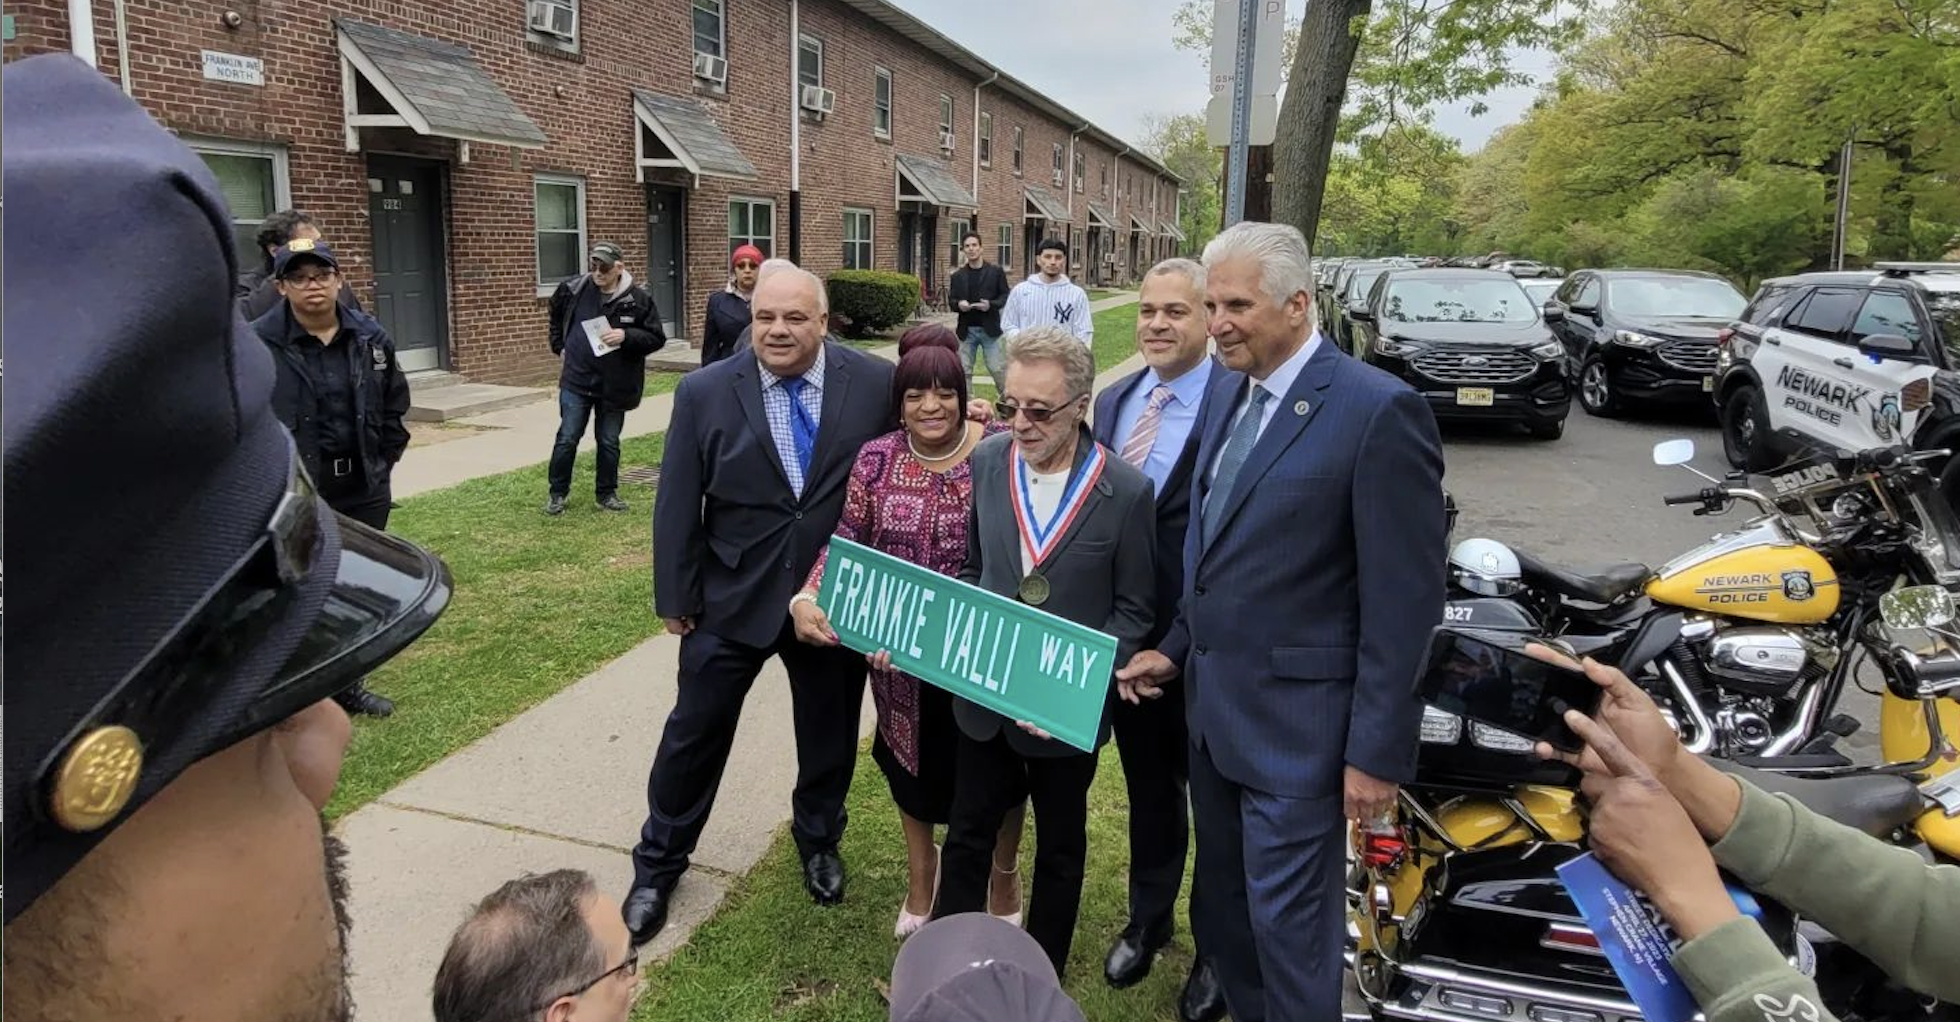 MUSIC ICON FRANKIE VALLI HONORED WITH STREET NAMING